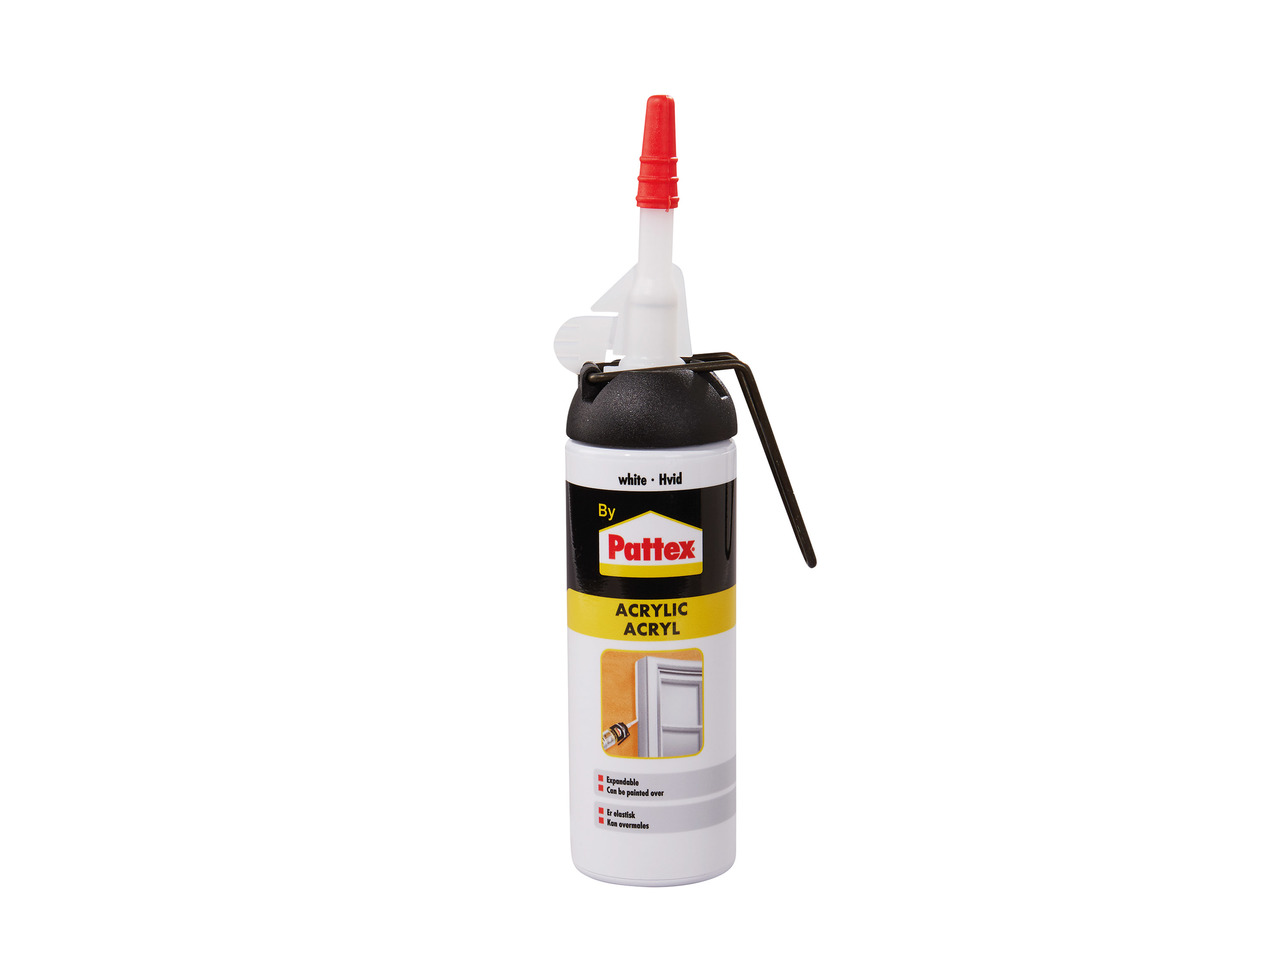 Pattex Silicone Dispenser or Acrylic Sealant1